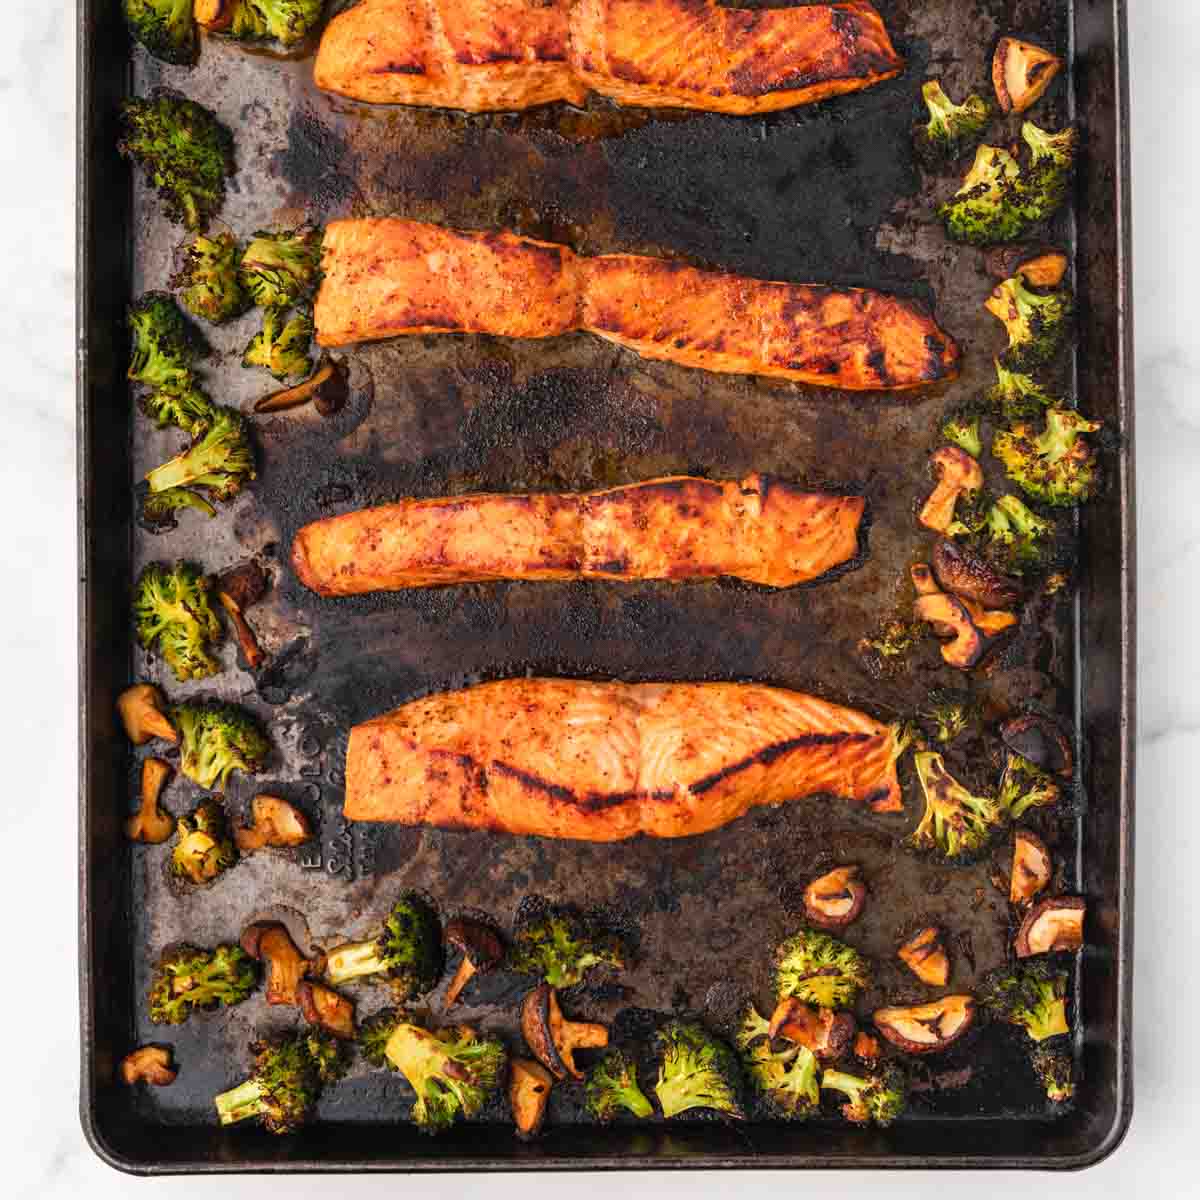 cooked salmon fillets on a dark baking sheet surrounded by shiitake mushrooms and broccoli